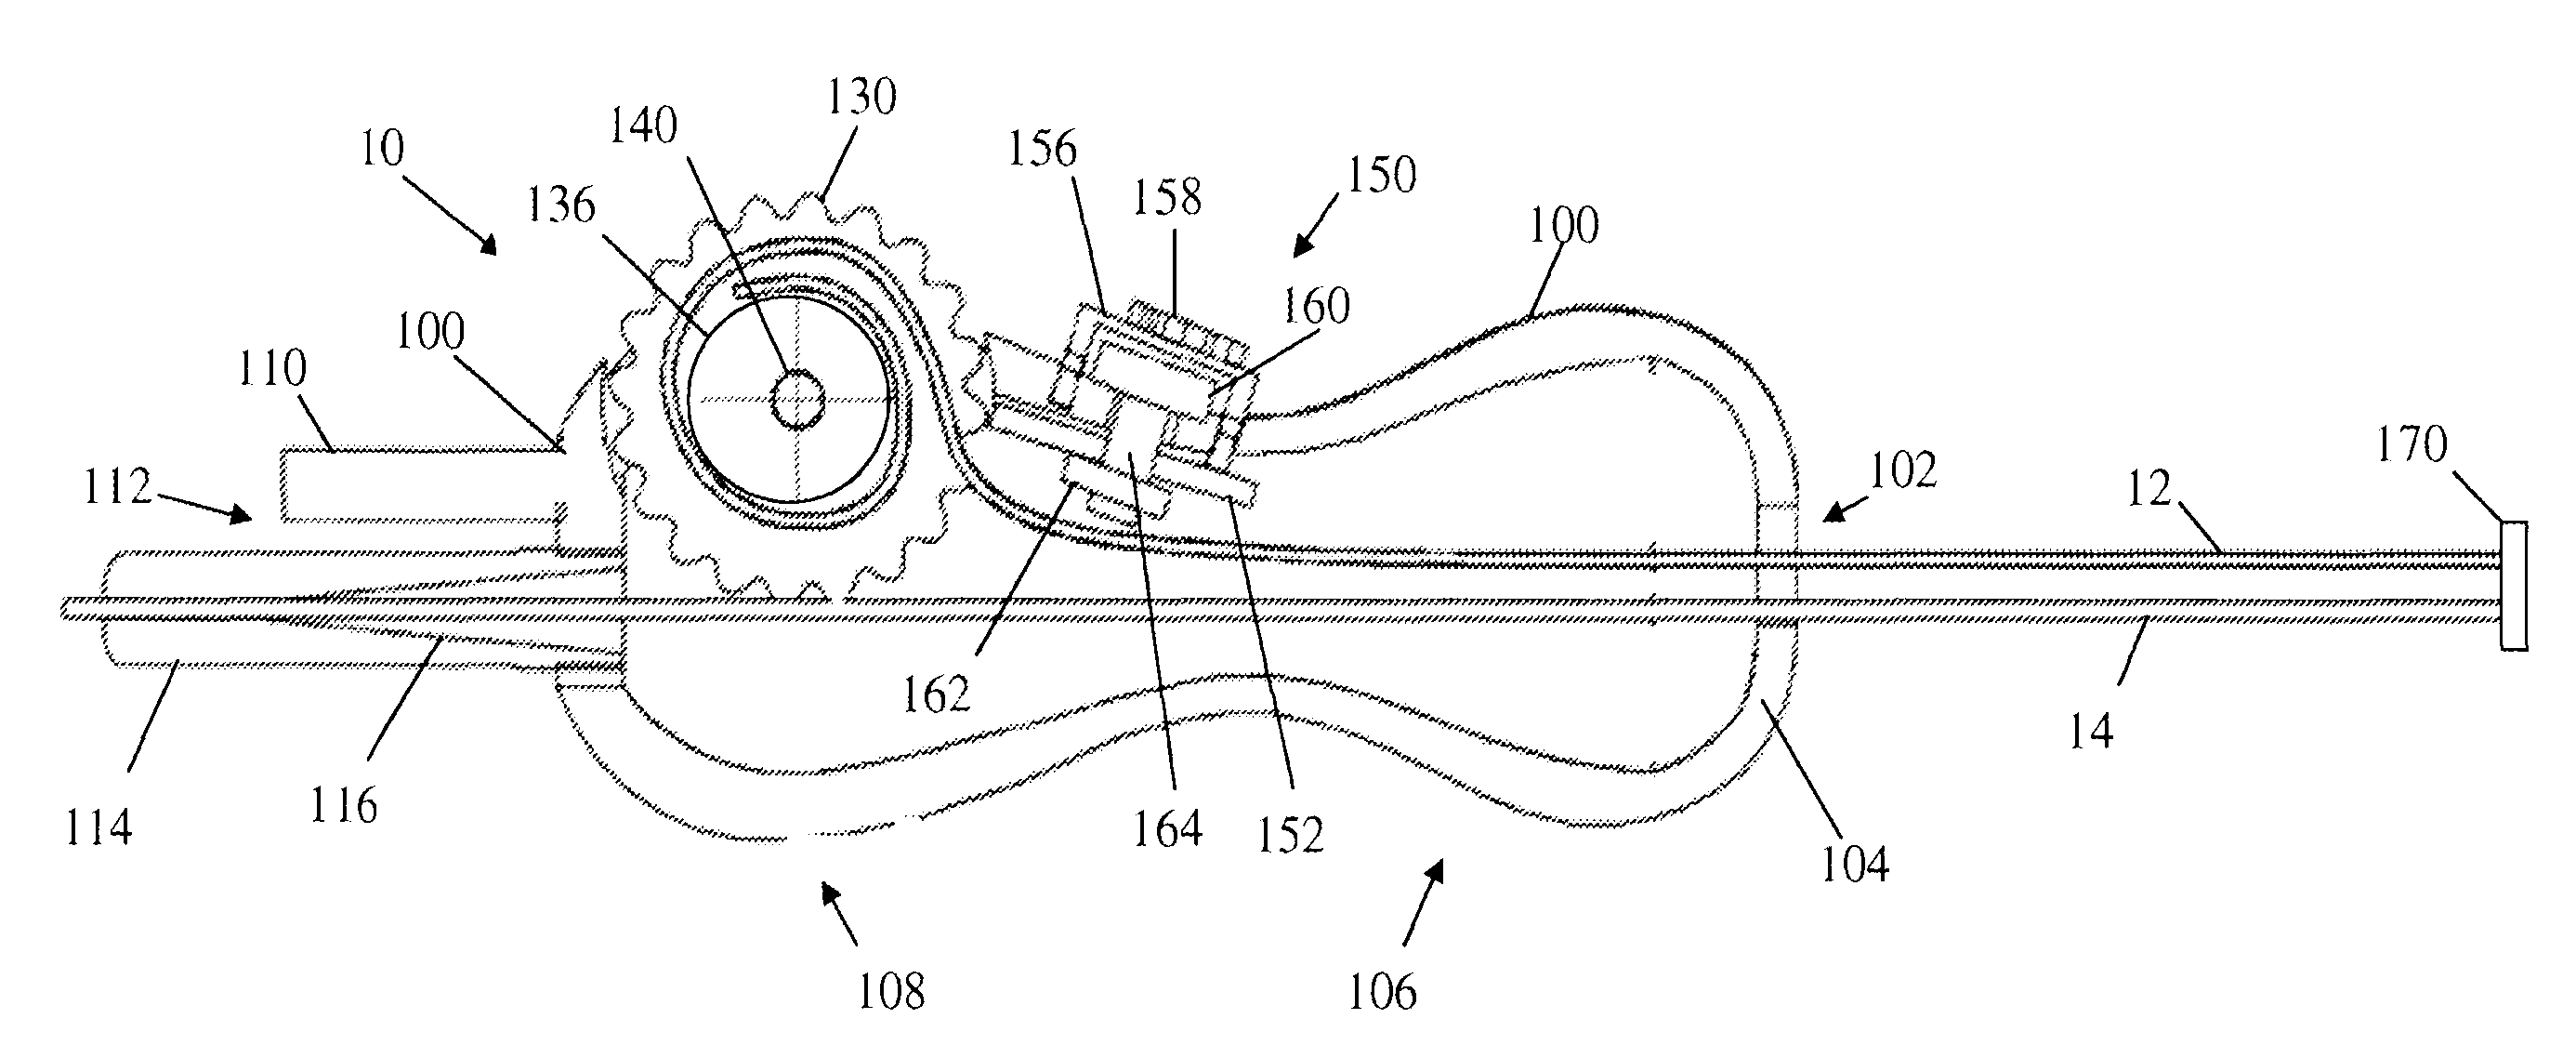 Ultrasound assisted catheter placement system